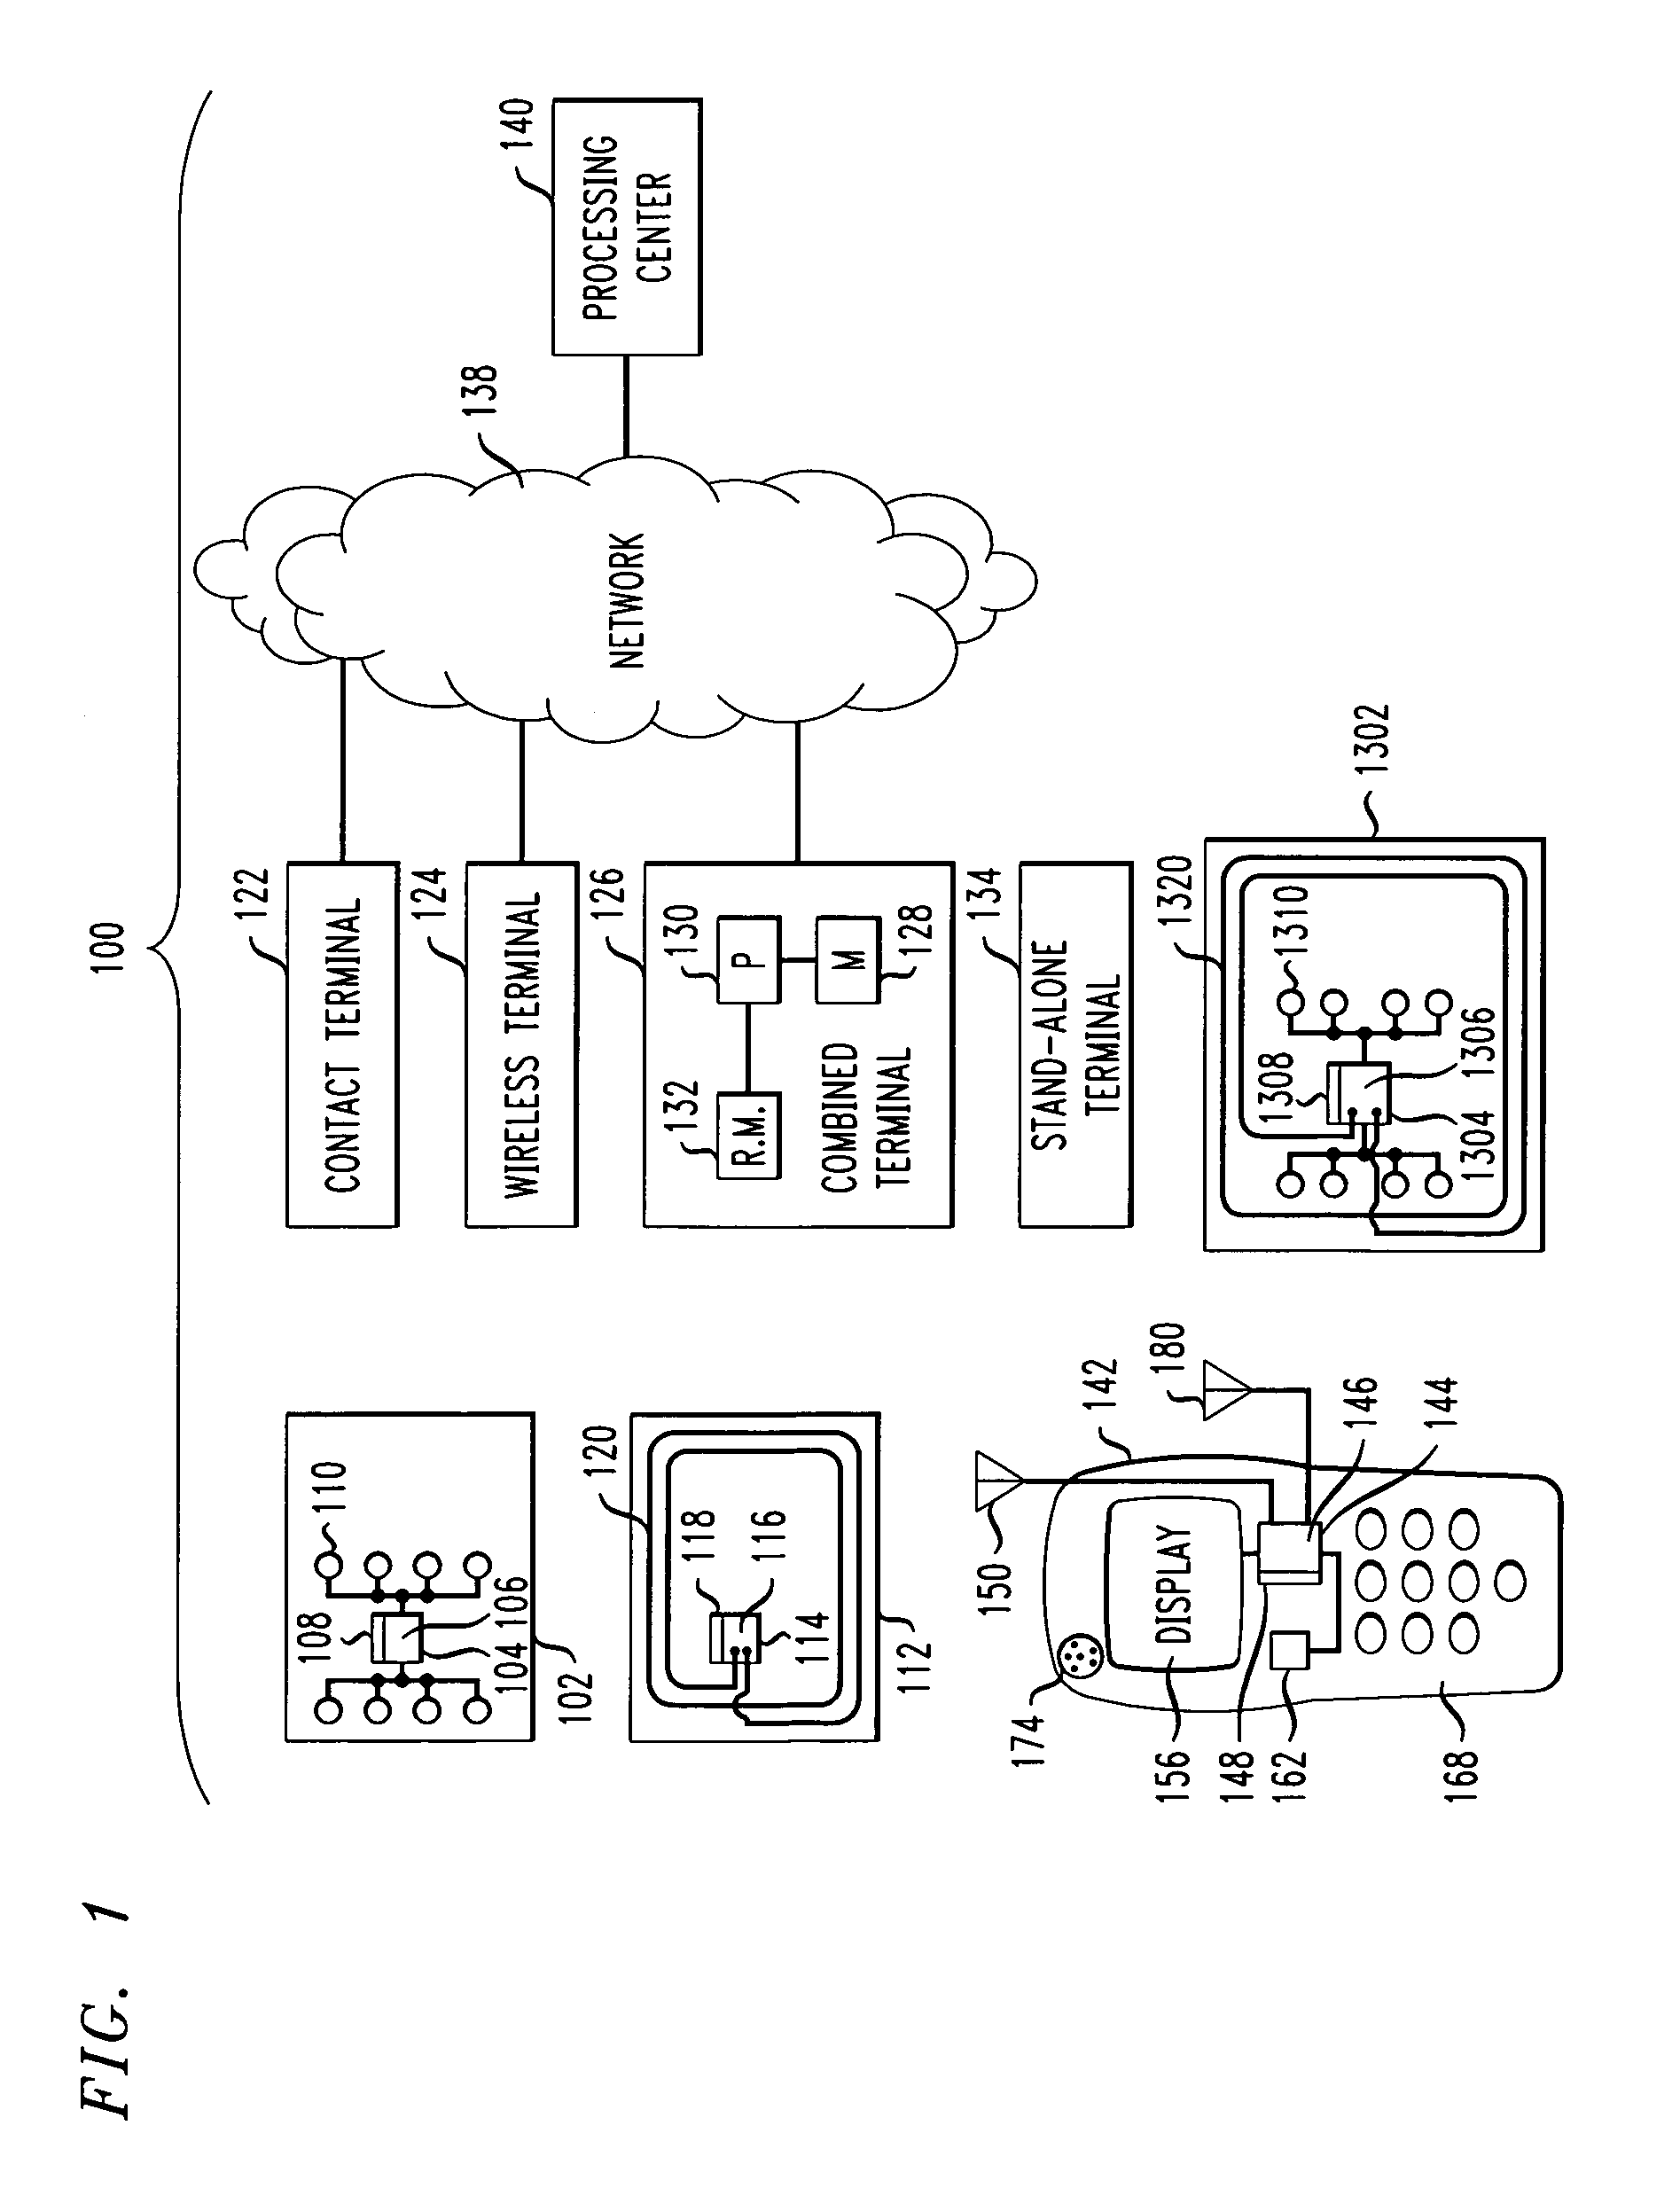 Apparatus and method for integrated payment and electronic merchandise transfer